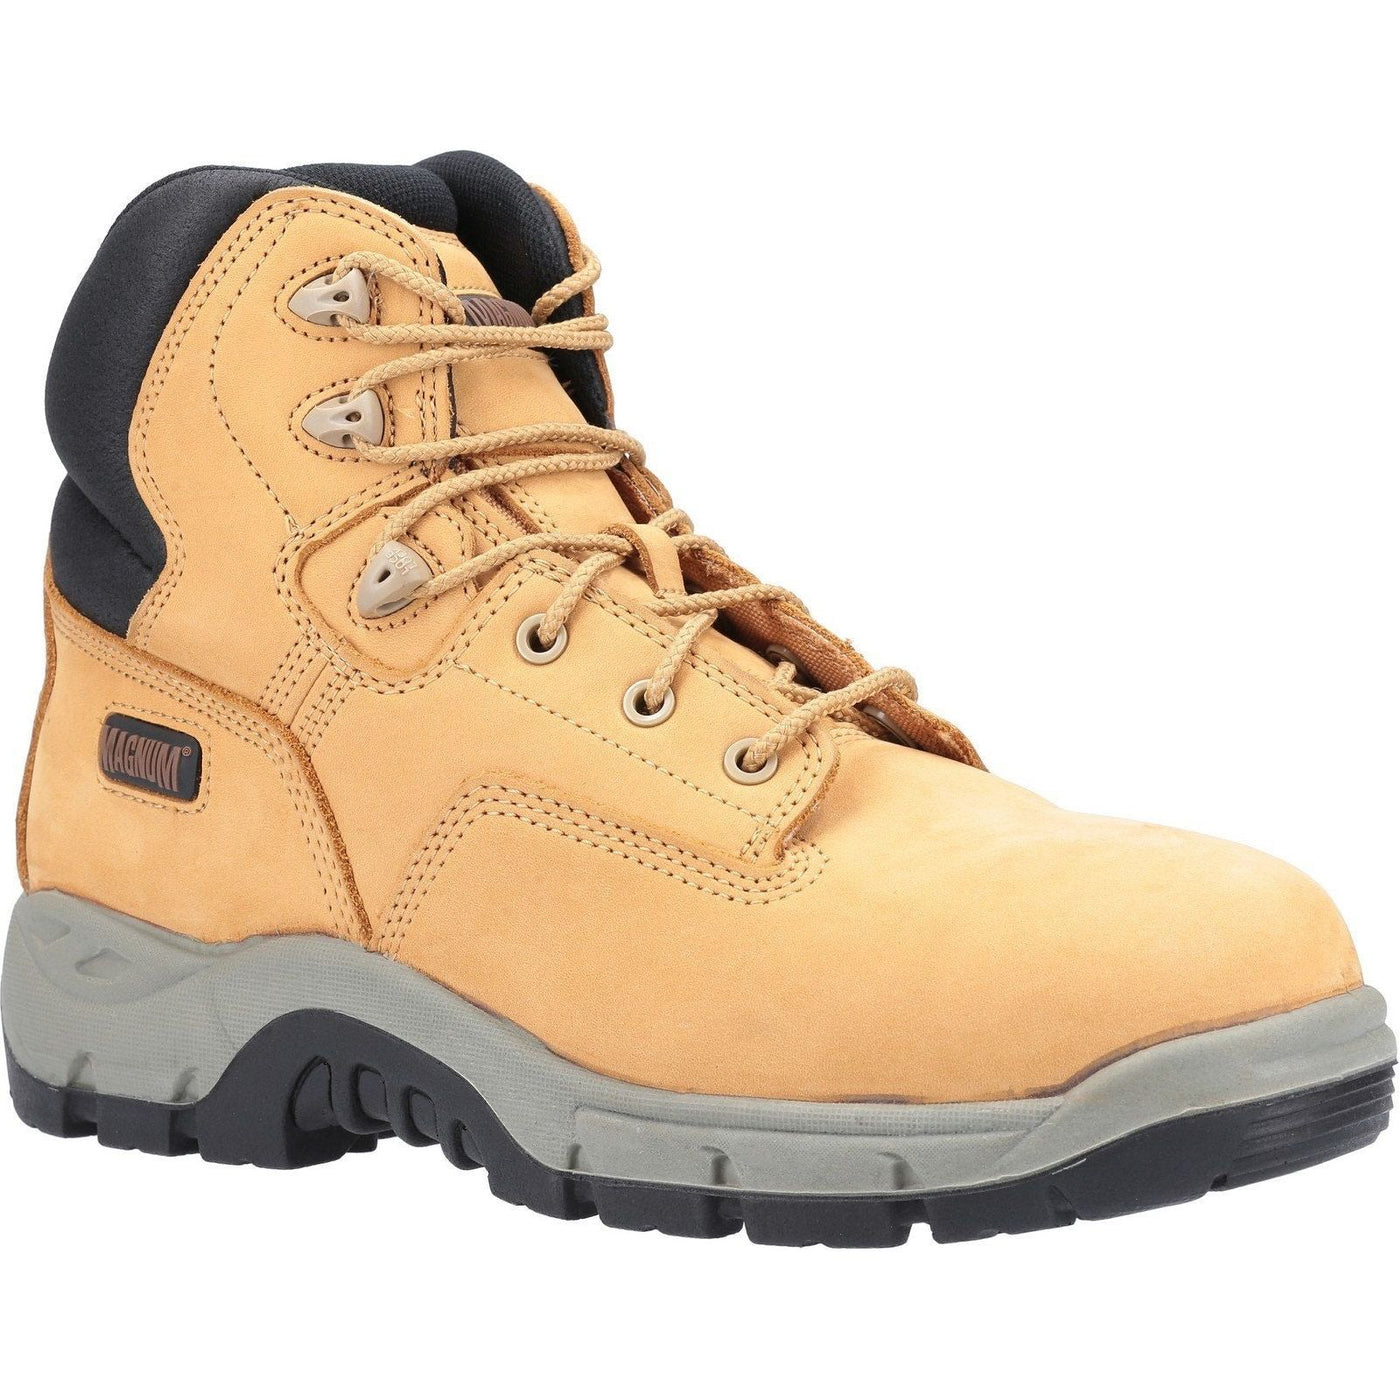 Magnum Precision Sitemaster Composite Toe Safety Boots Womens